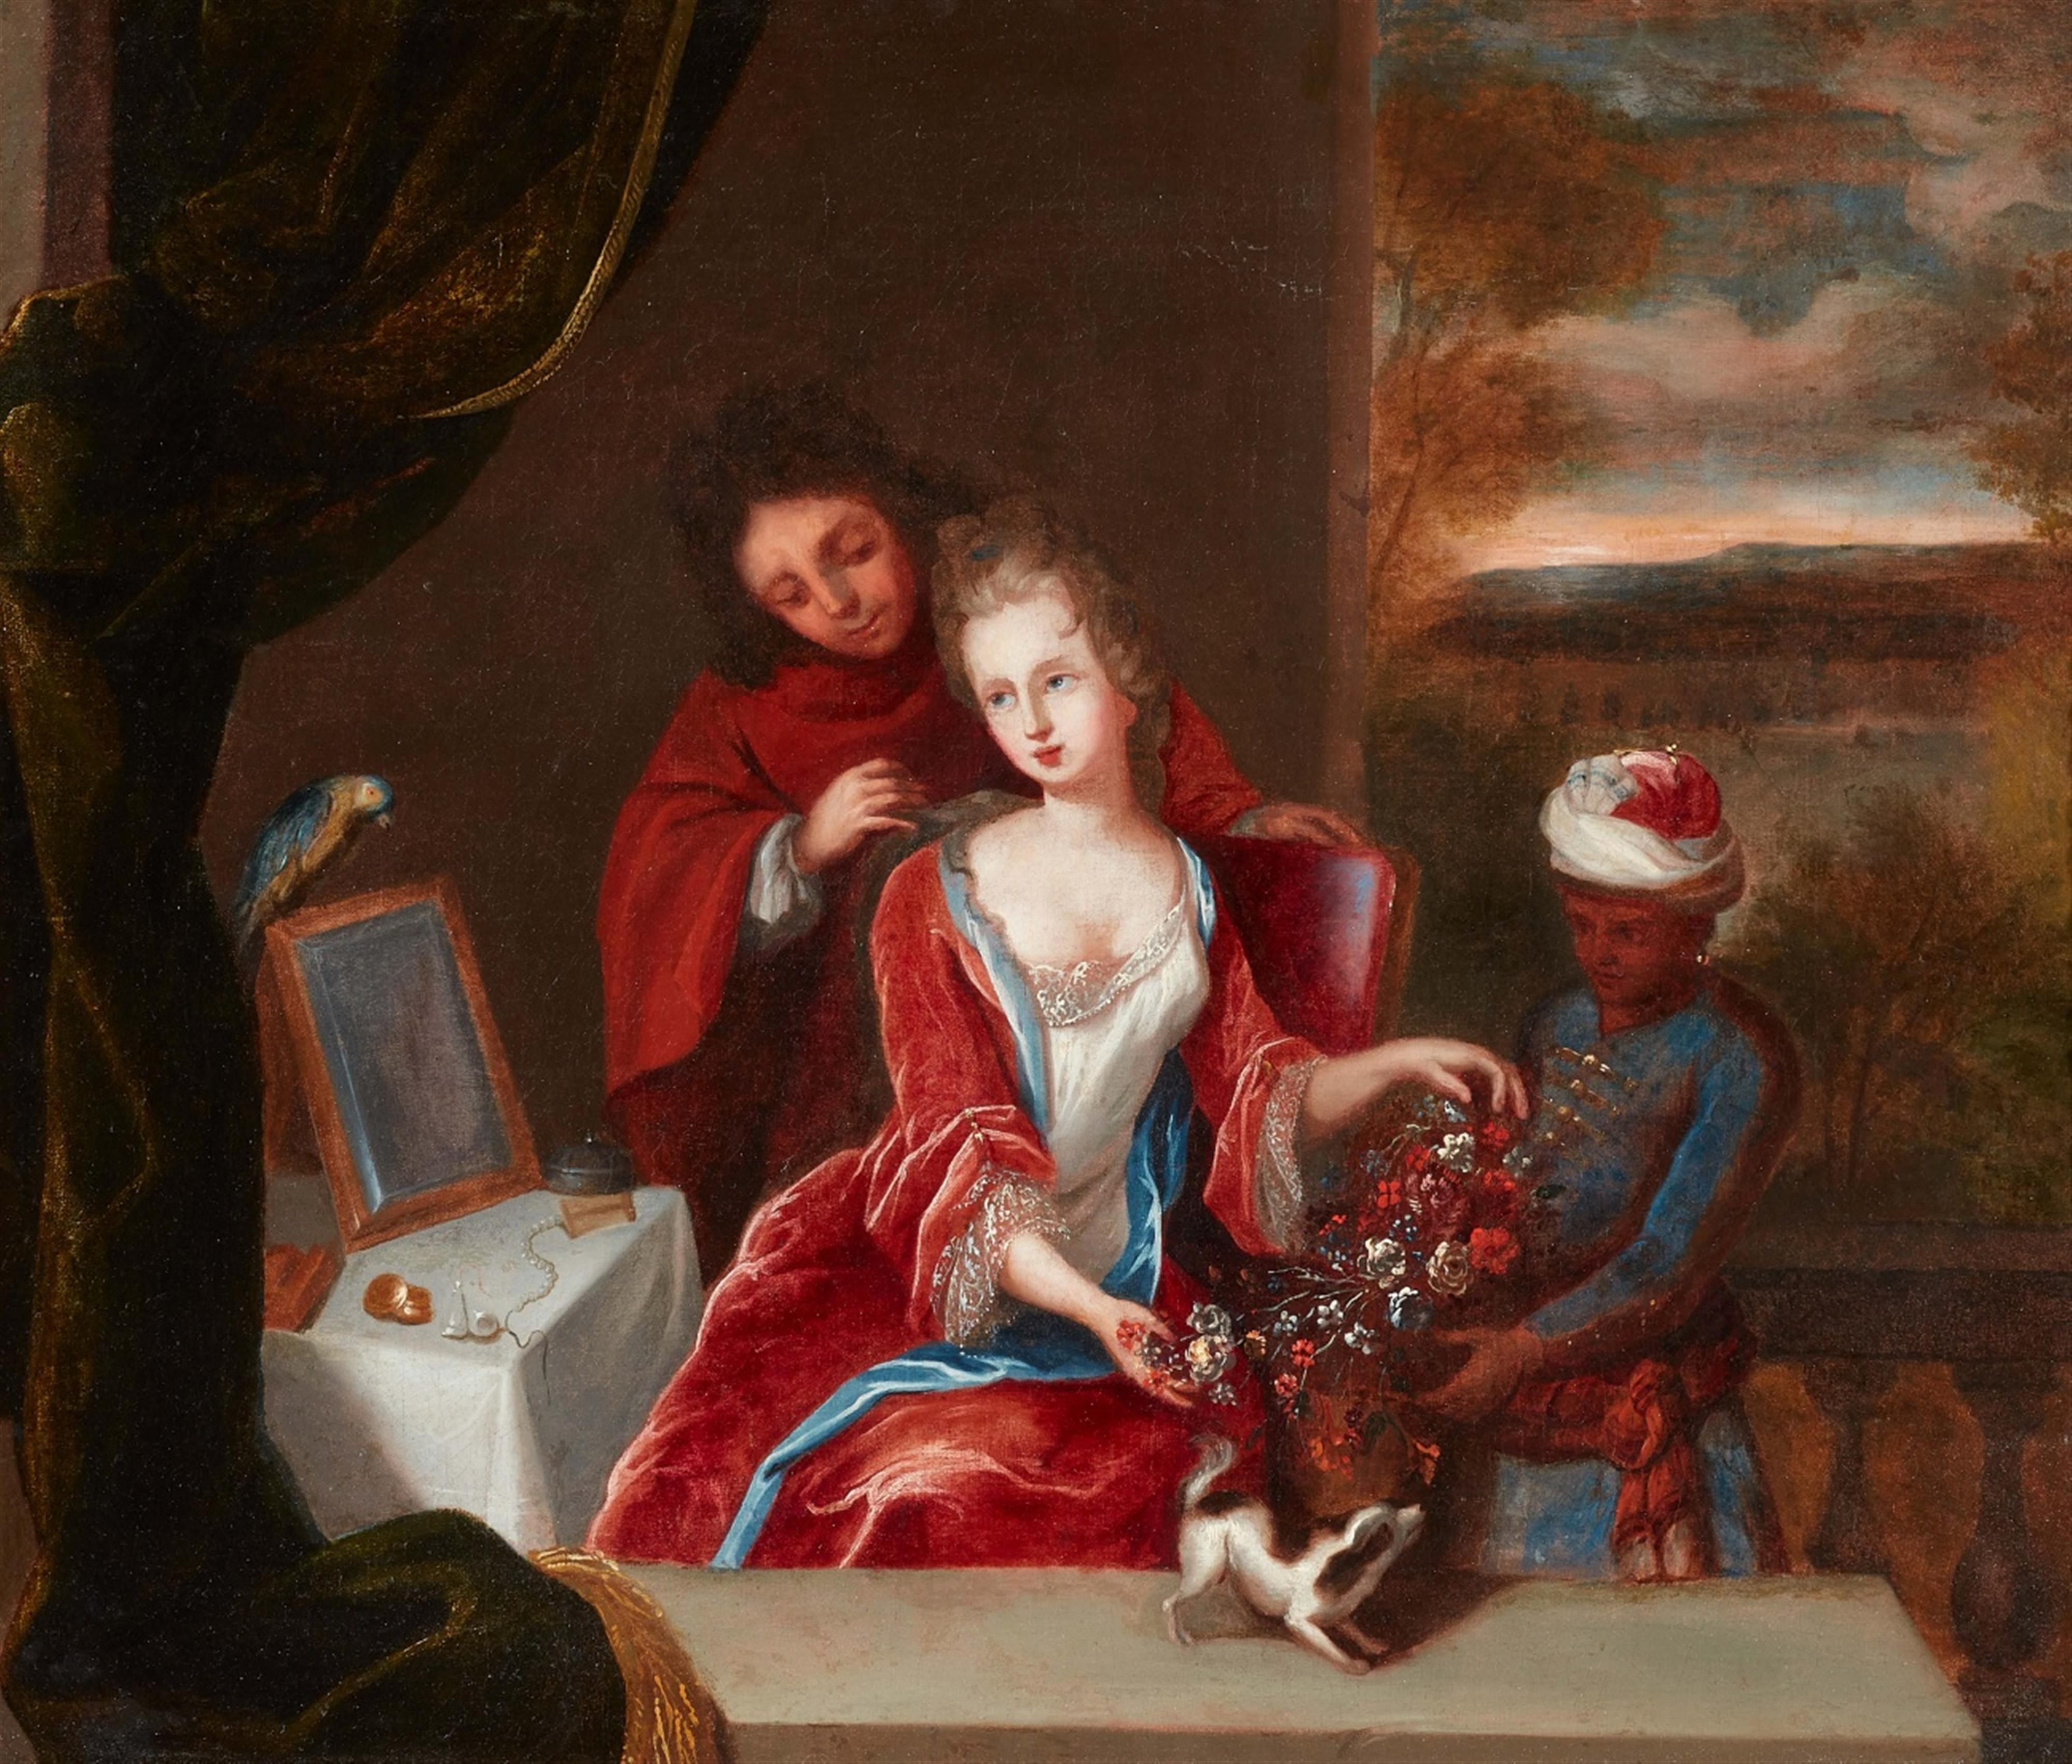 German or French artist 18th century - Courtship Scene - image-1